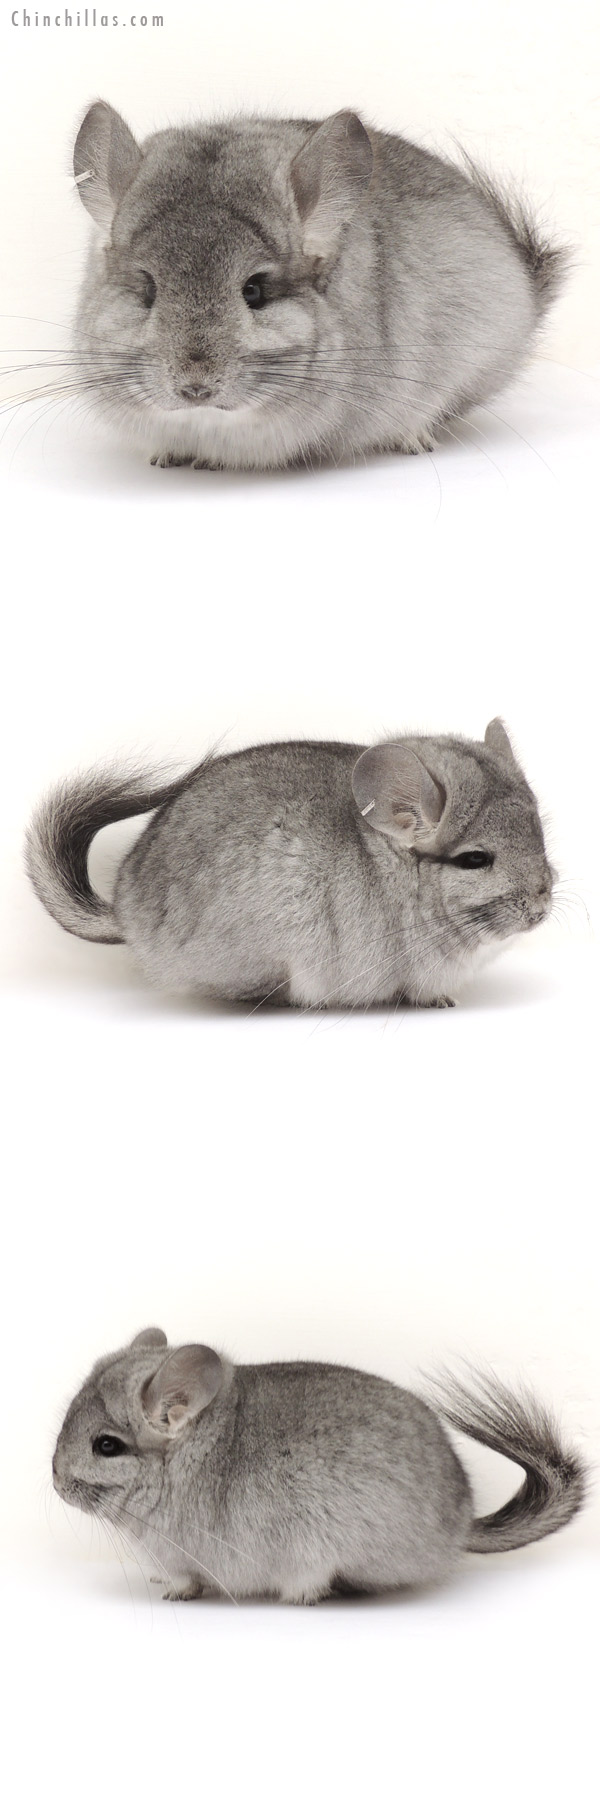 Chinchilla or related item offered for sale or export on Chinchillas.com - 14056 Standard  Royal Persian Angora Female Chinchilla